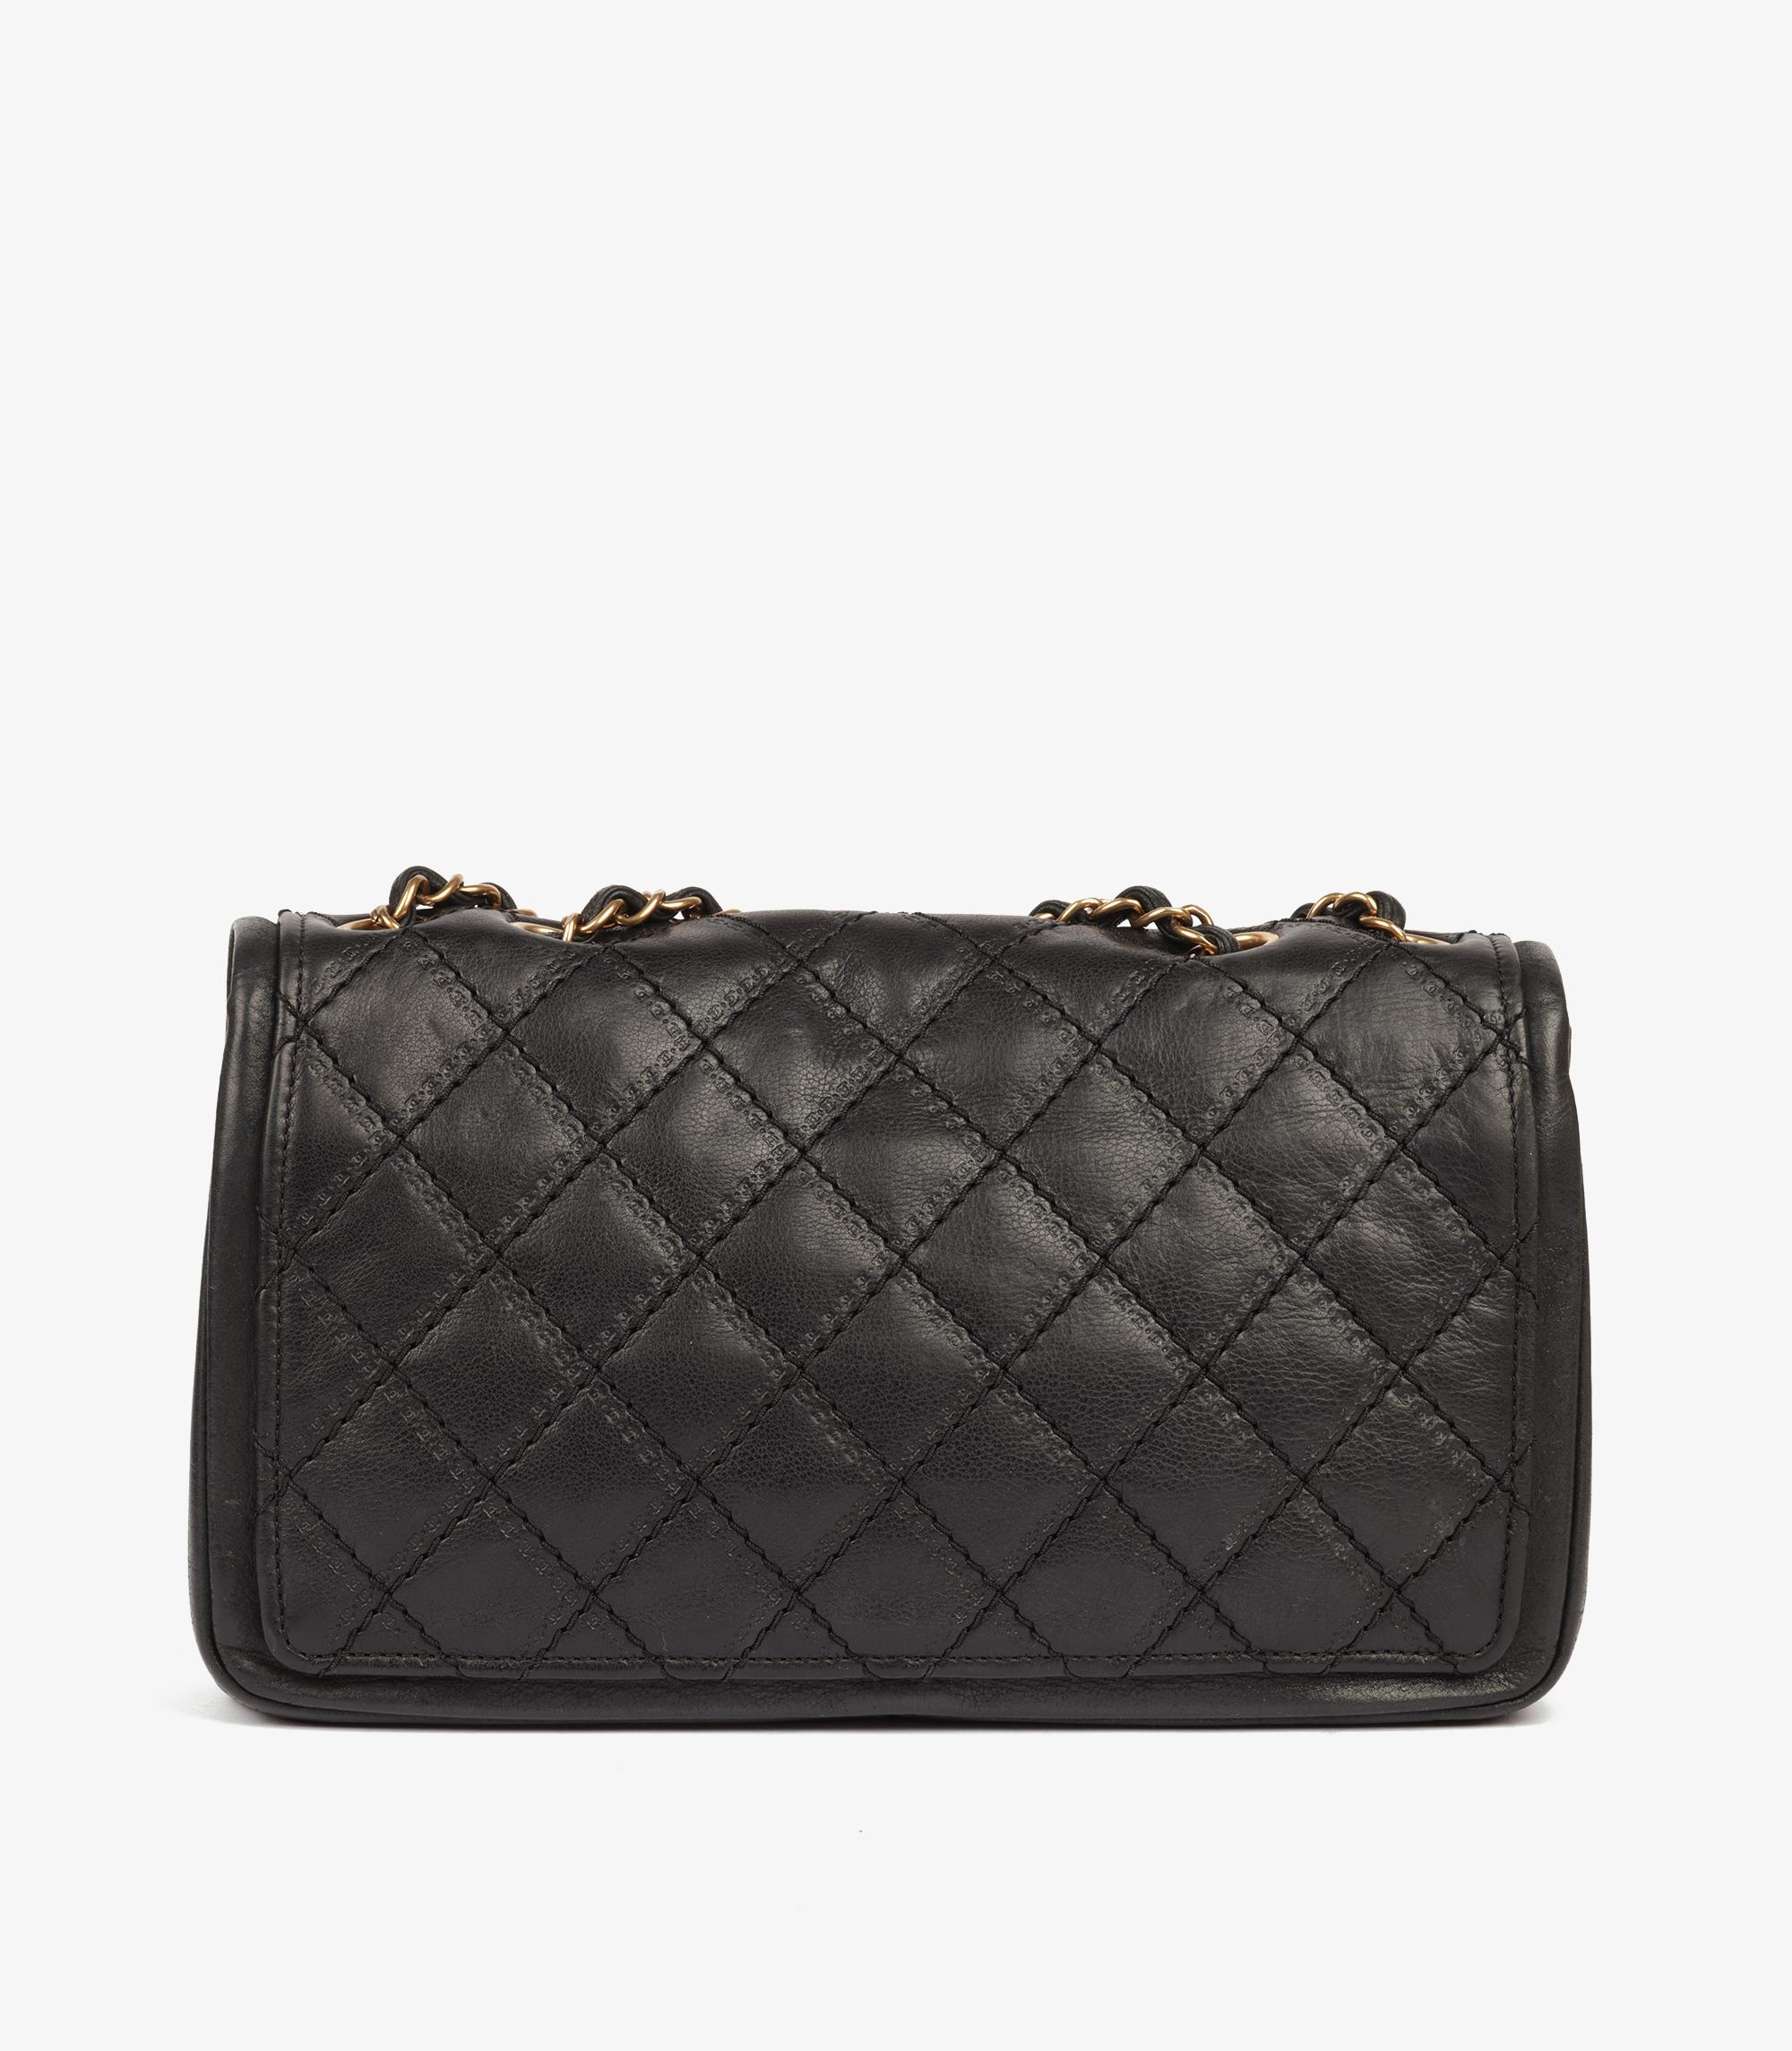 Chanel Black Quilted Iridescent Calfskin Leather Sheriff Star Single Flag Bag For Sale 3